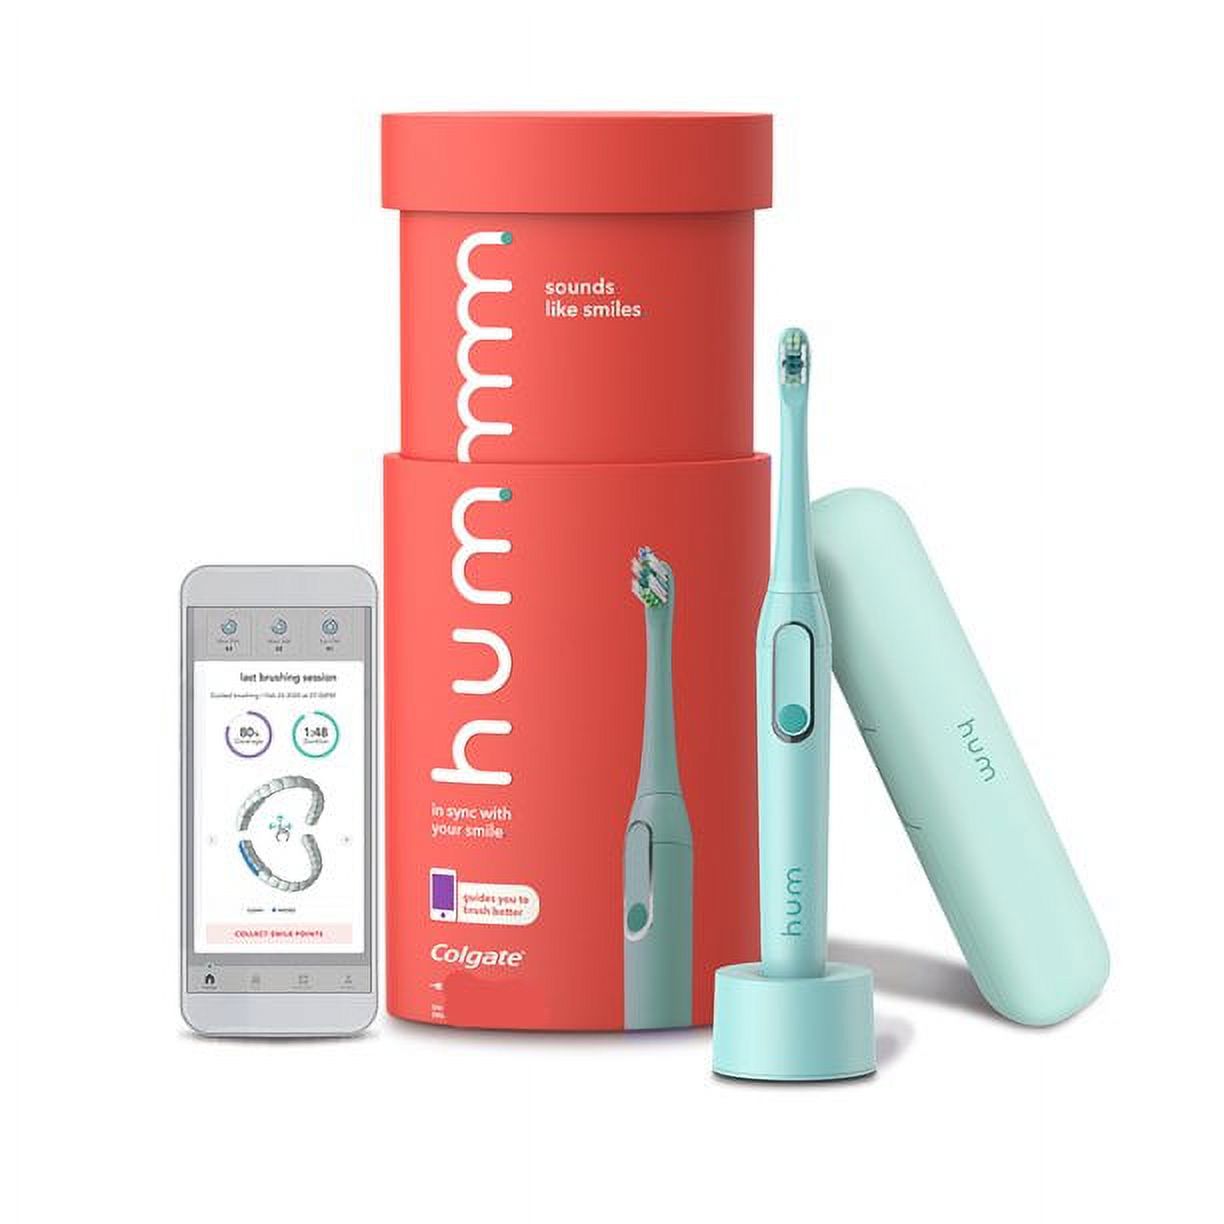 hum by Colgate Smart Electric Toothbrush, Rechargeable Sonic Toothbrush with Travel Case, Teal - image 1 of 11